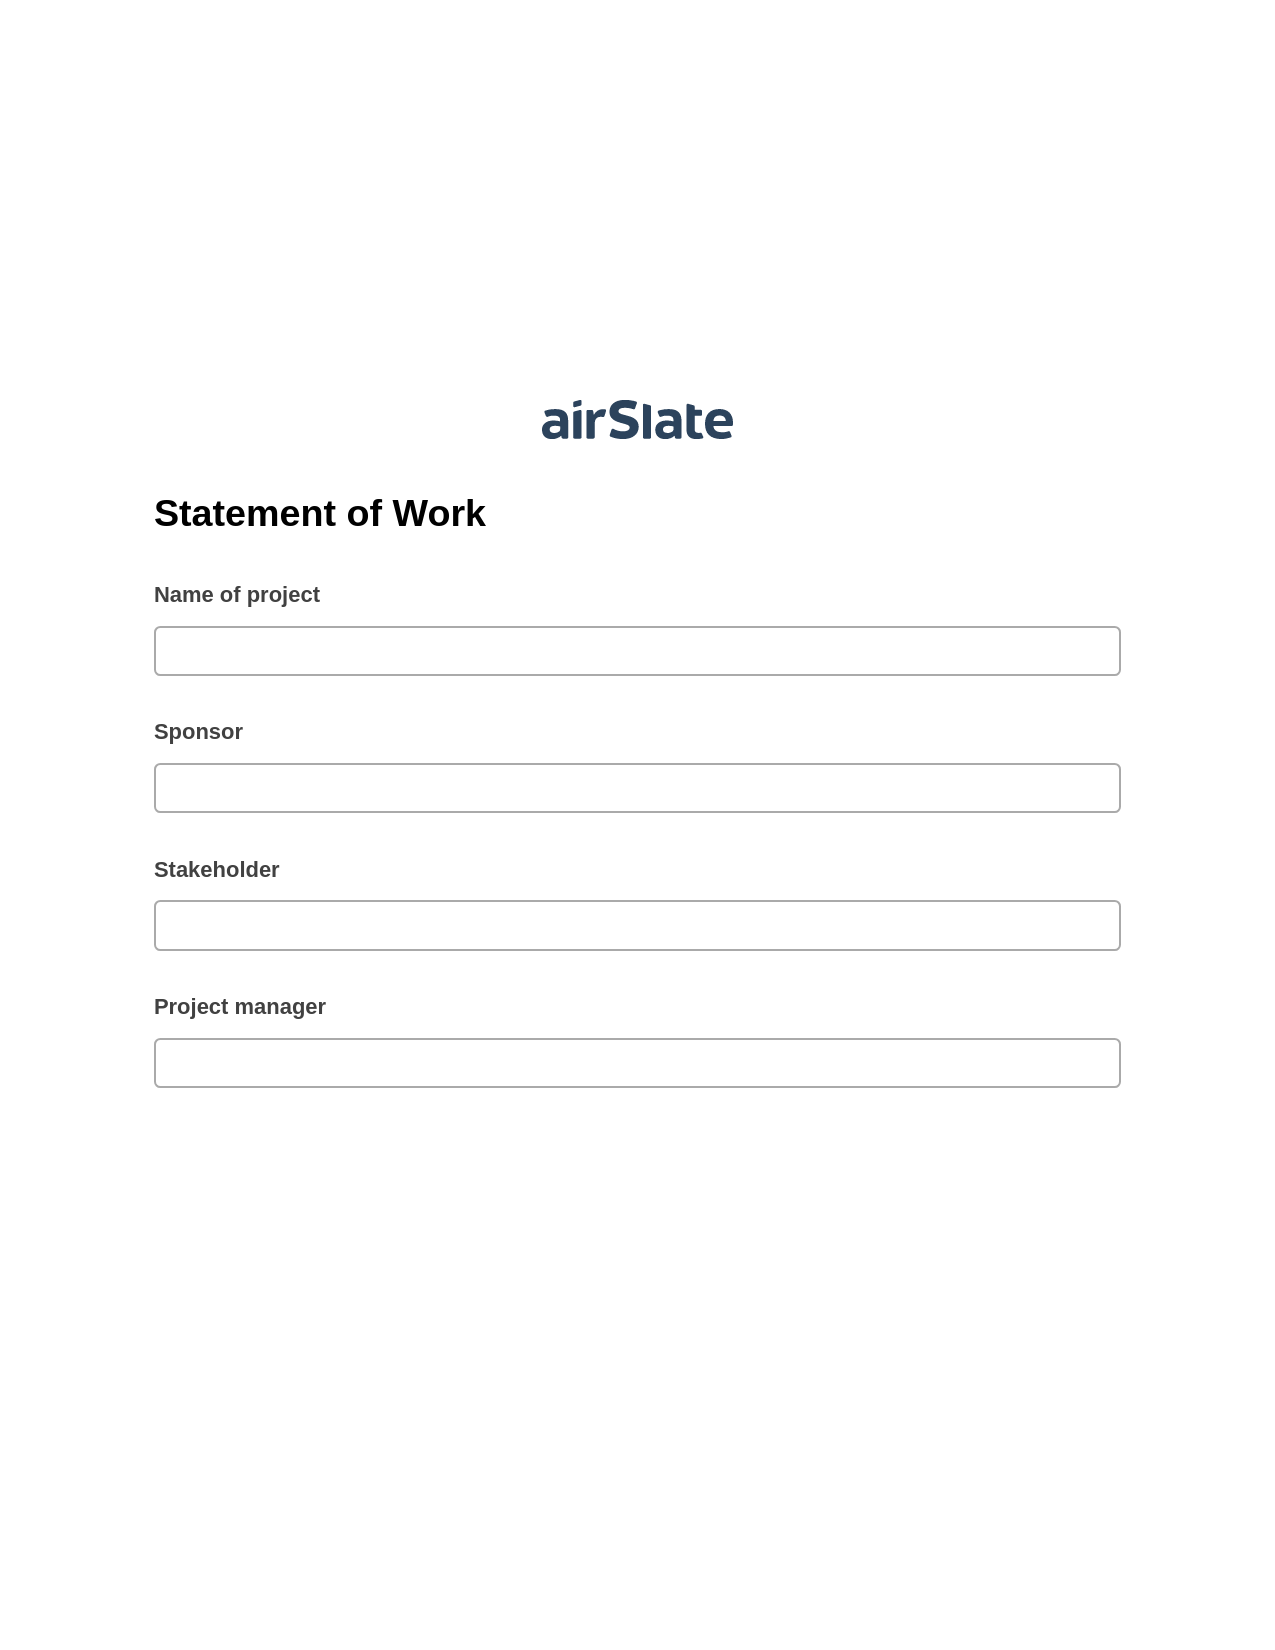 Statement of Work Pre-fill Document Bot, Create Slate Reminder Bot, Export to Excel 365 Bot